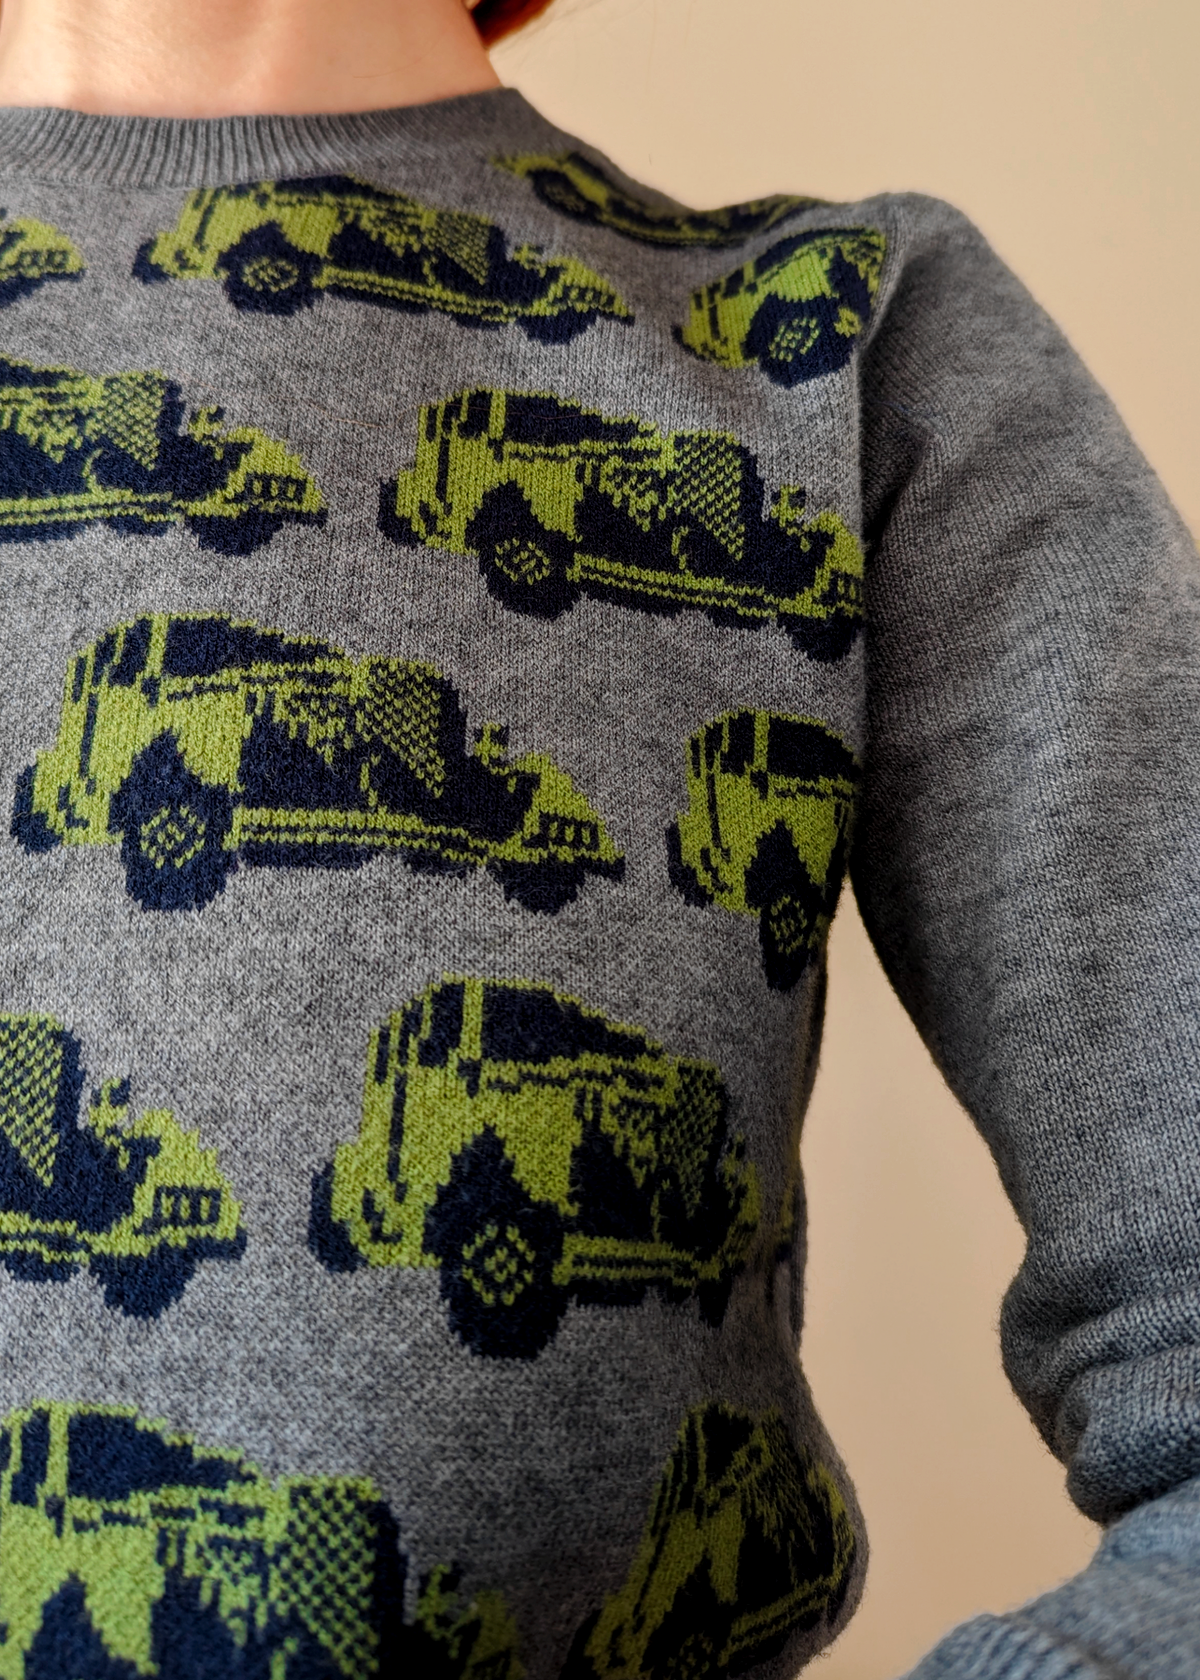 Retro 70s inspired crew neck sweater in grey with old vintage car intarsia design at front in green, by Nice Things by Paloma S.